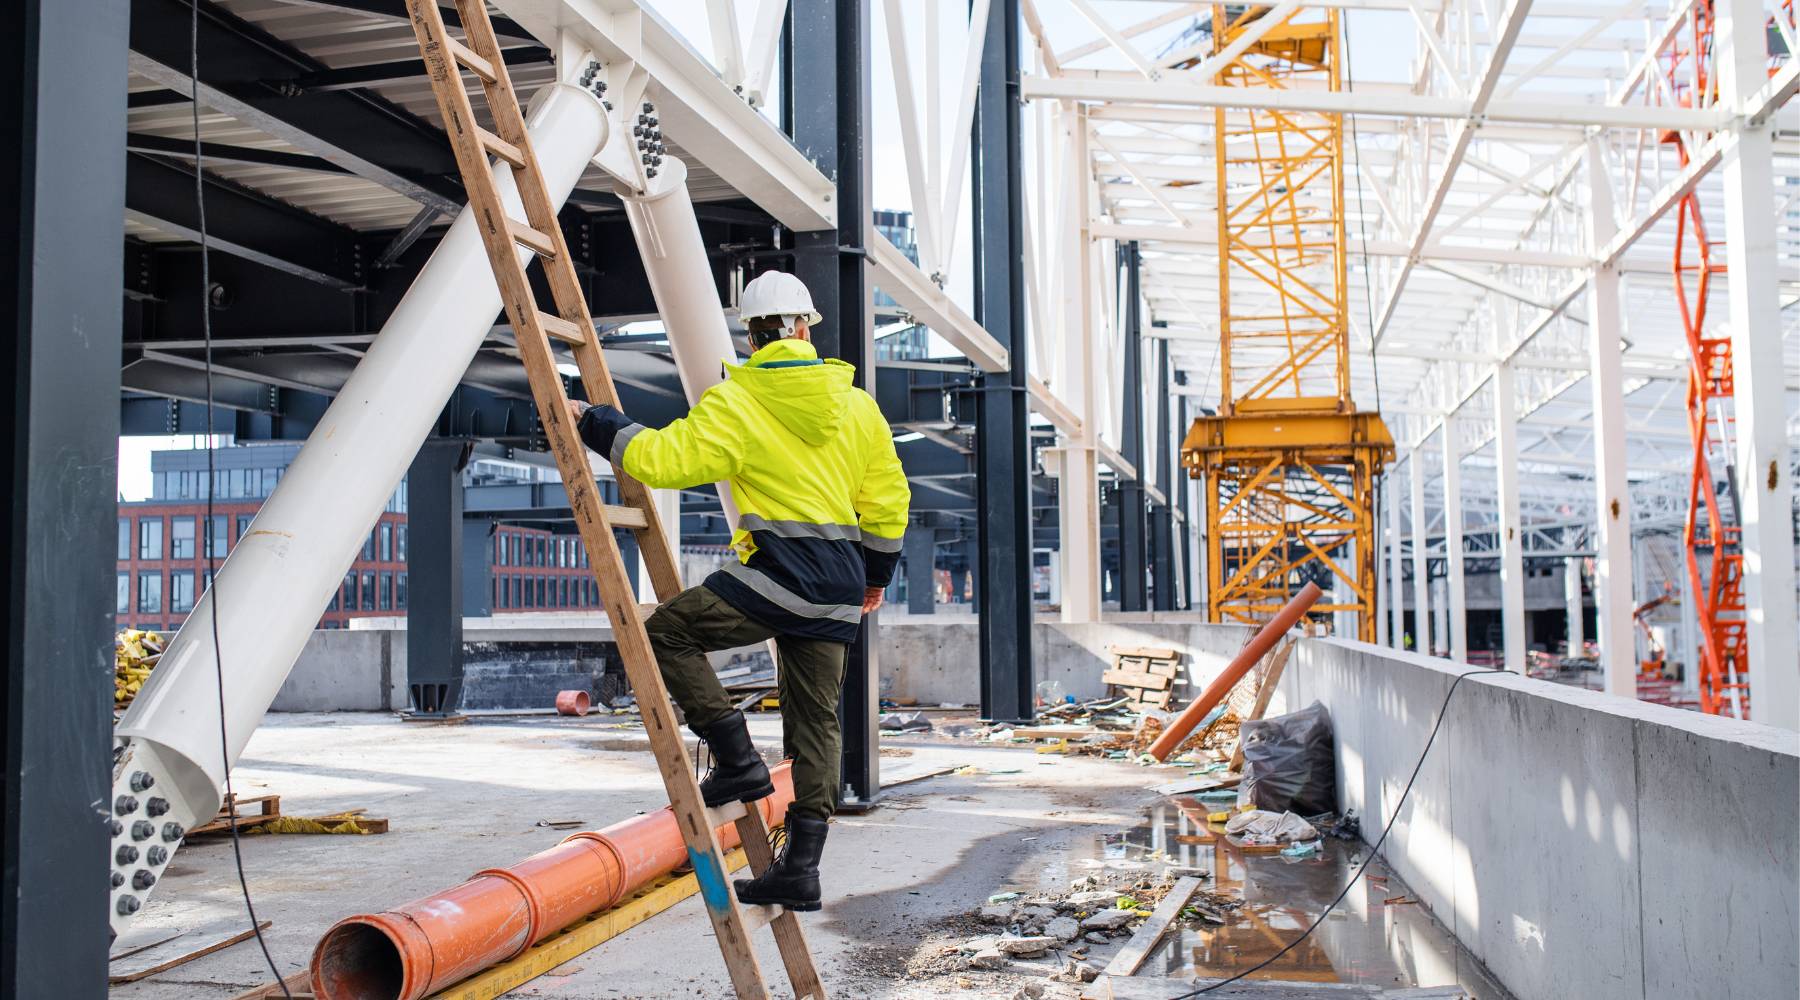 What Is A Good Way To Address Hazards On A Construction Site